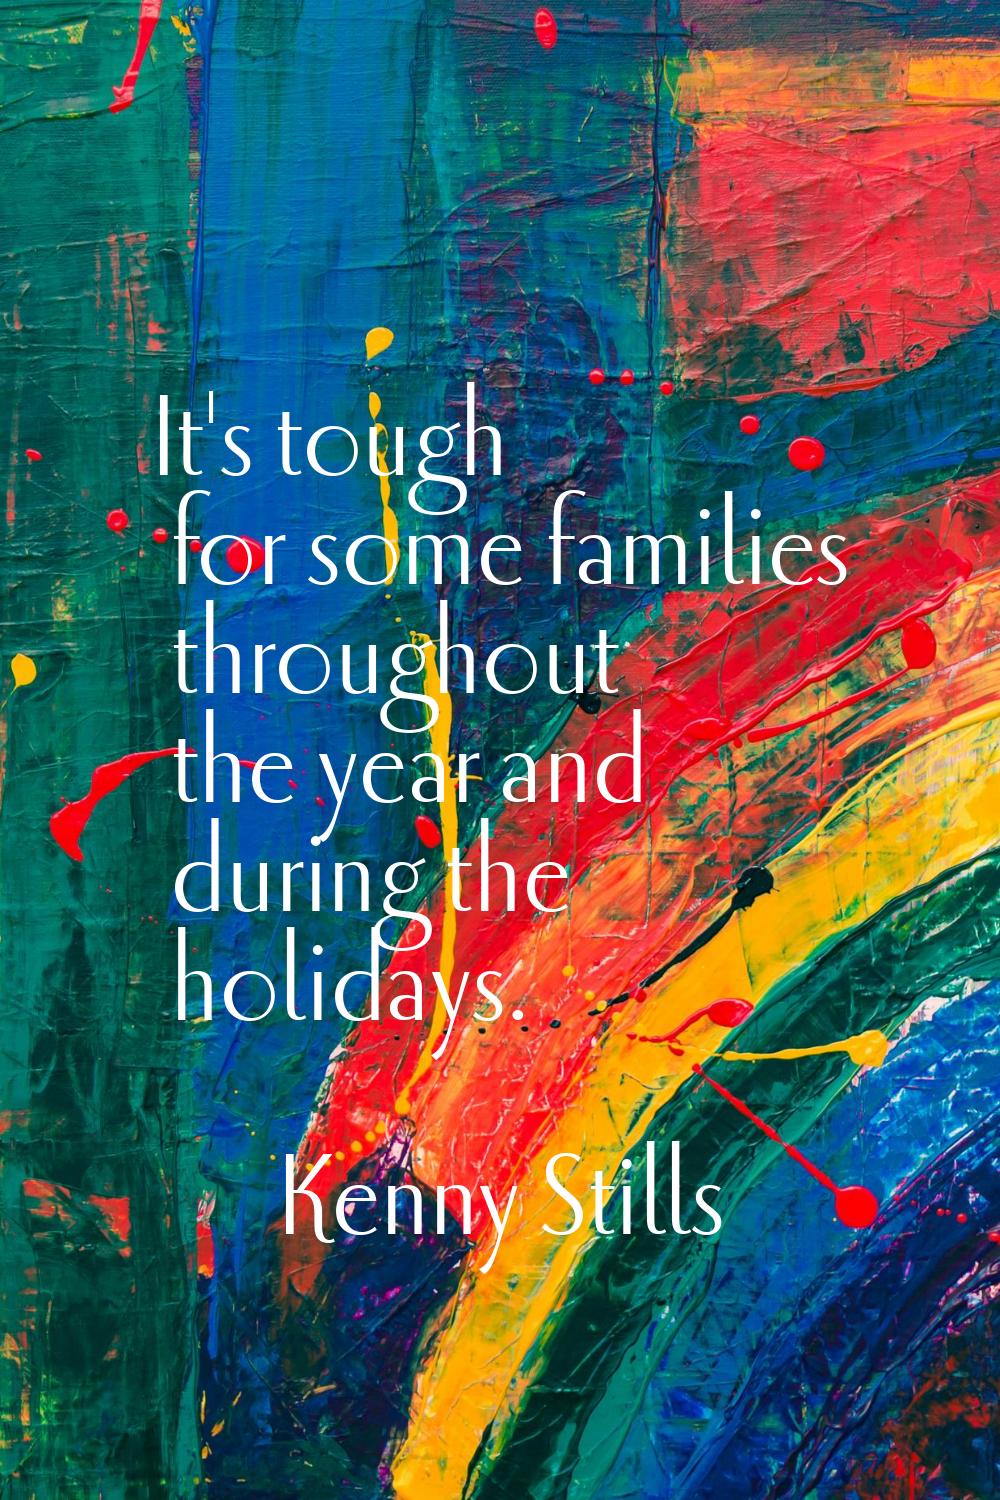 It's tough for some families throughout the year and during the holidays.